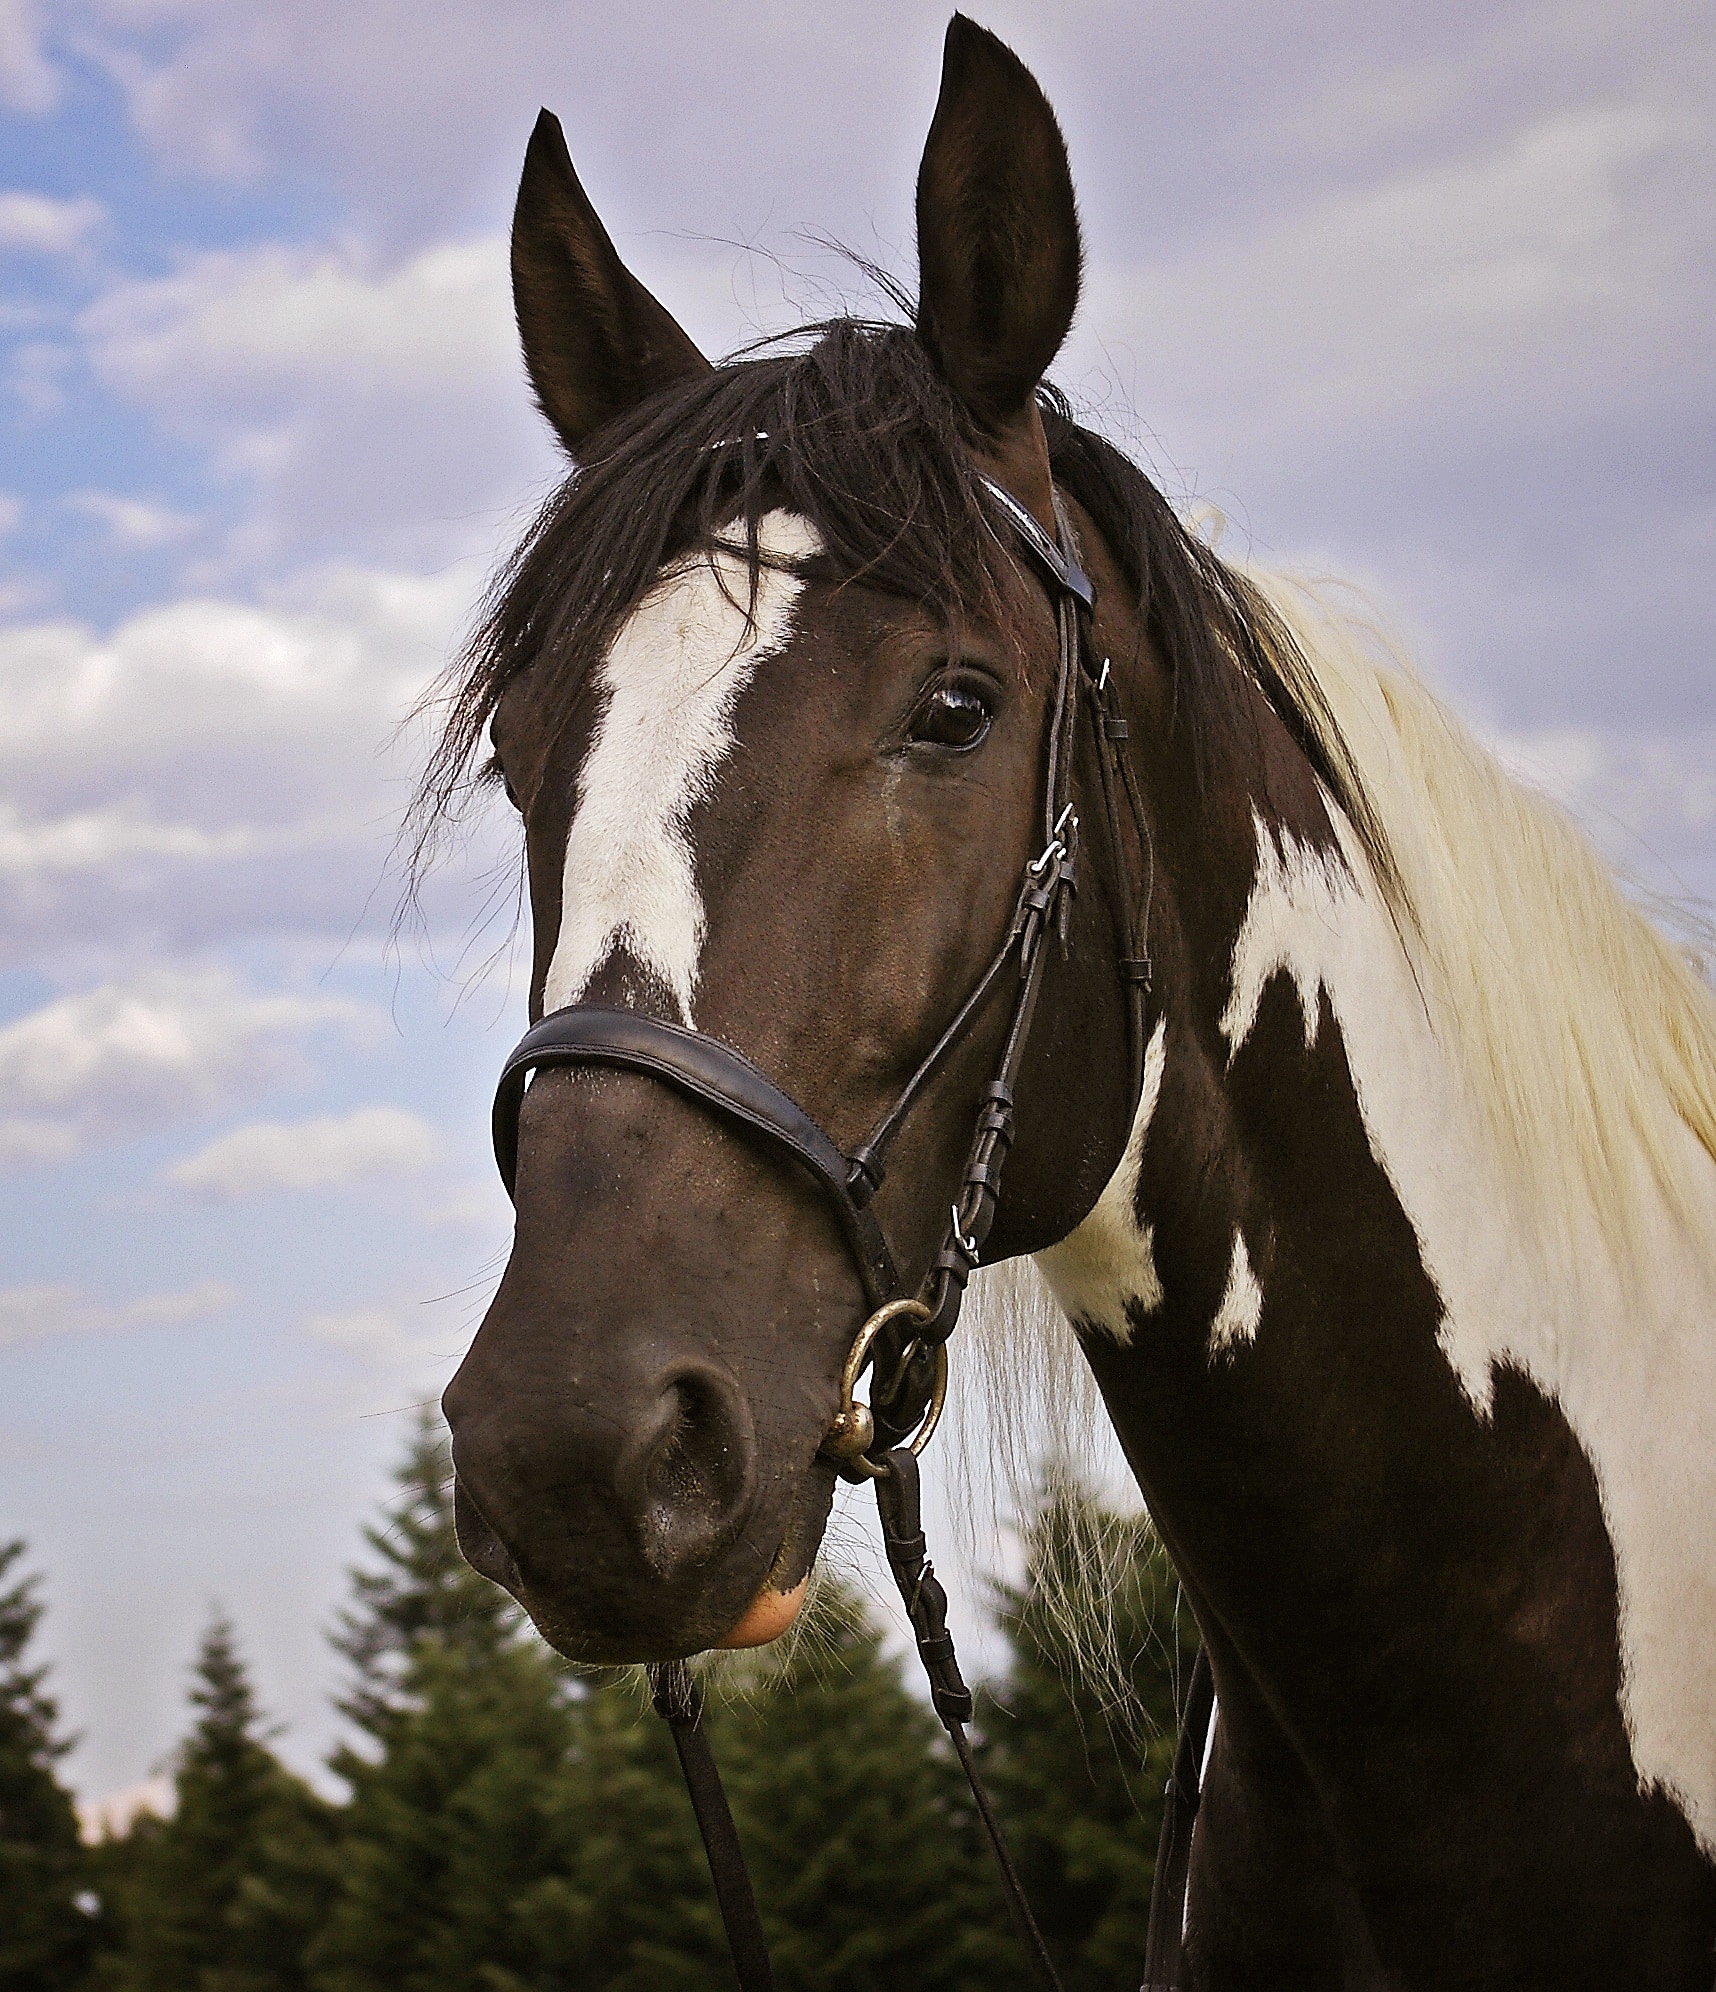 close up photo of black and white horse during daytime